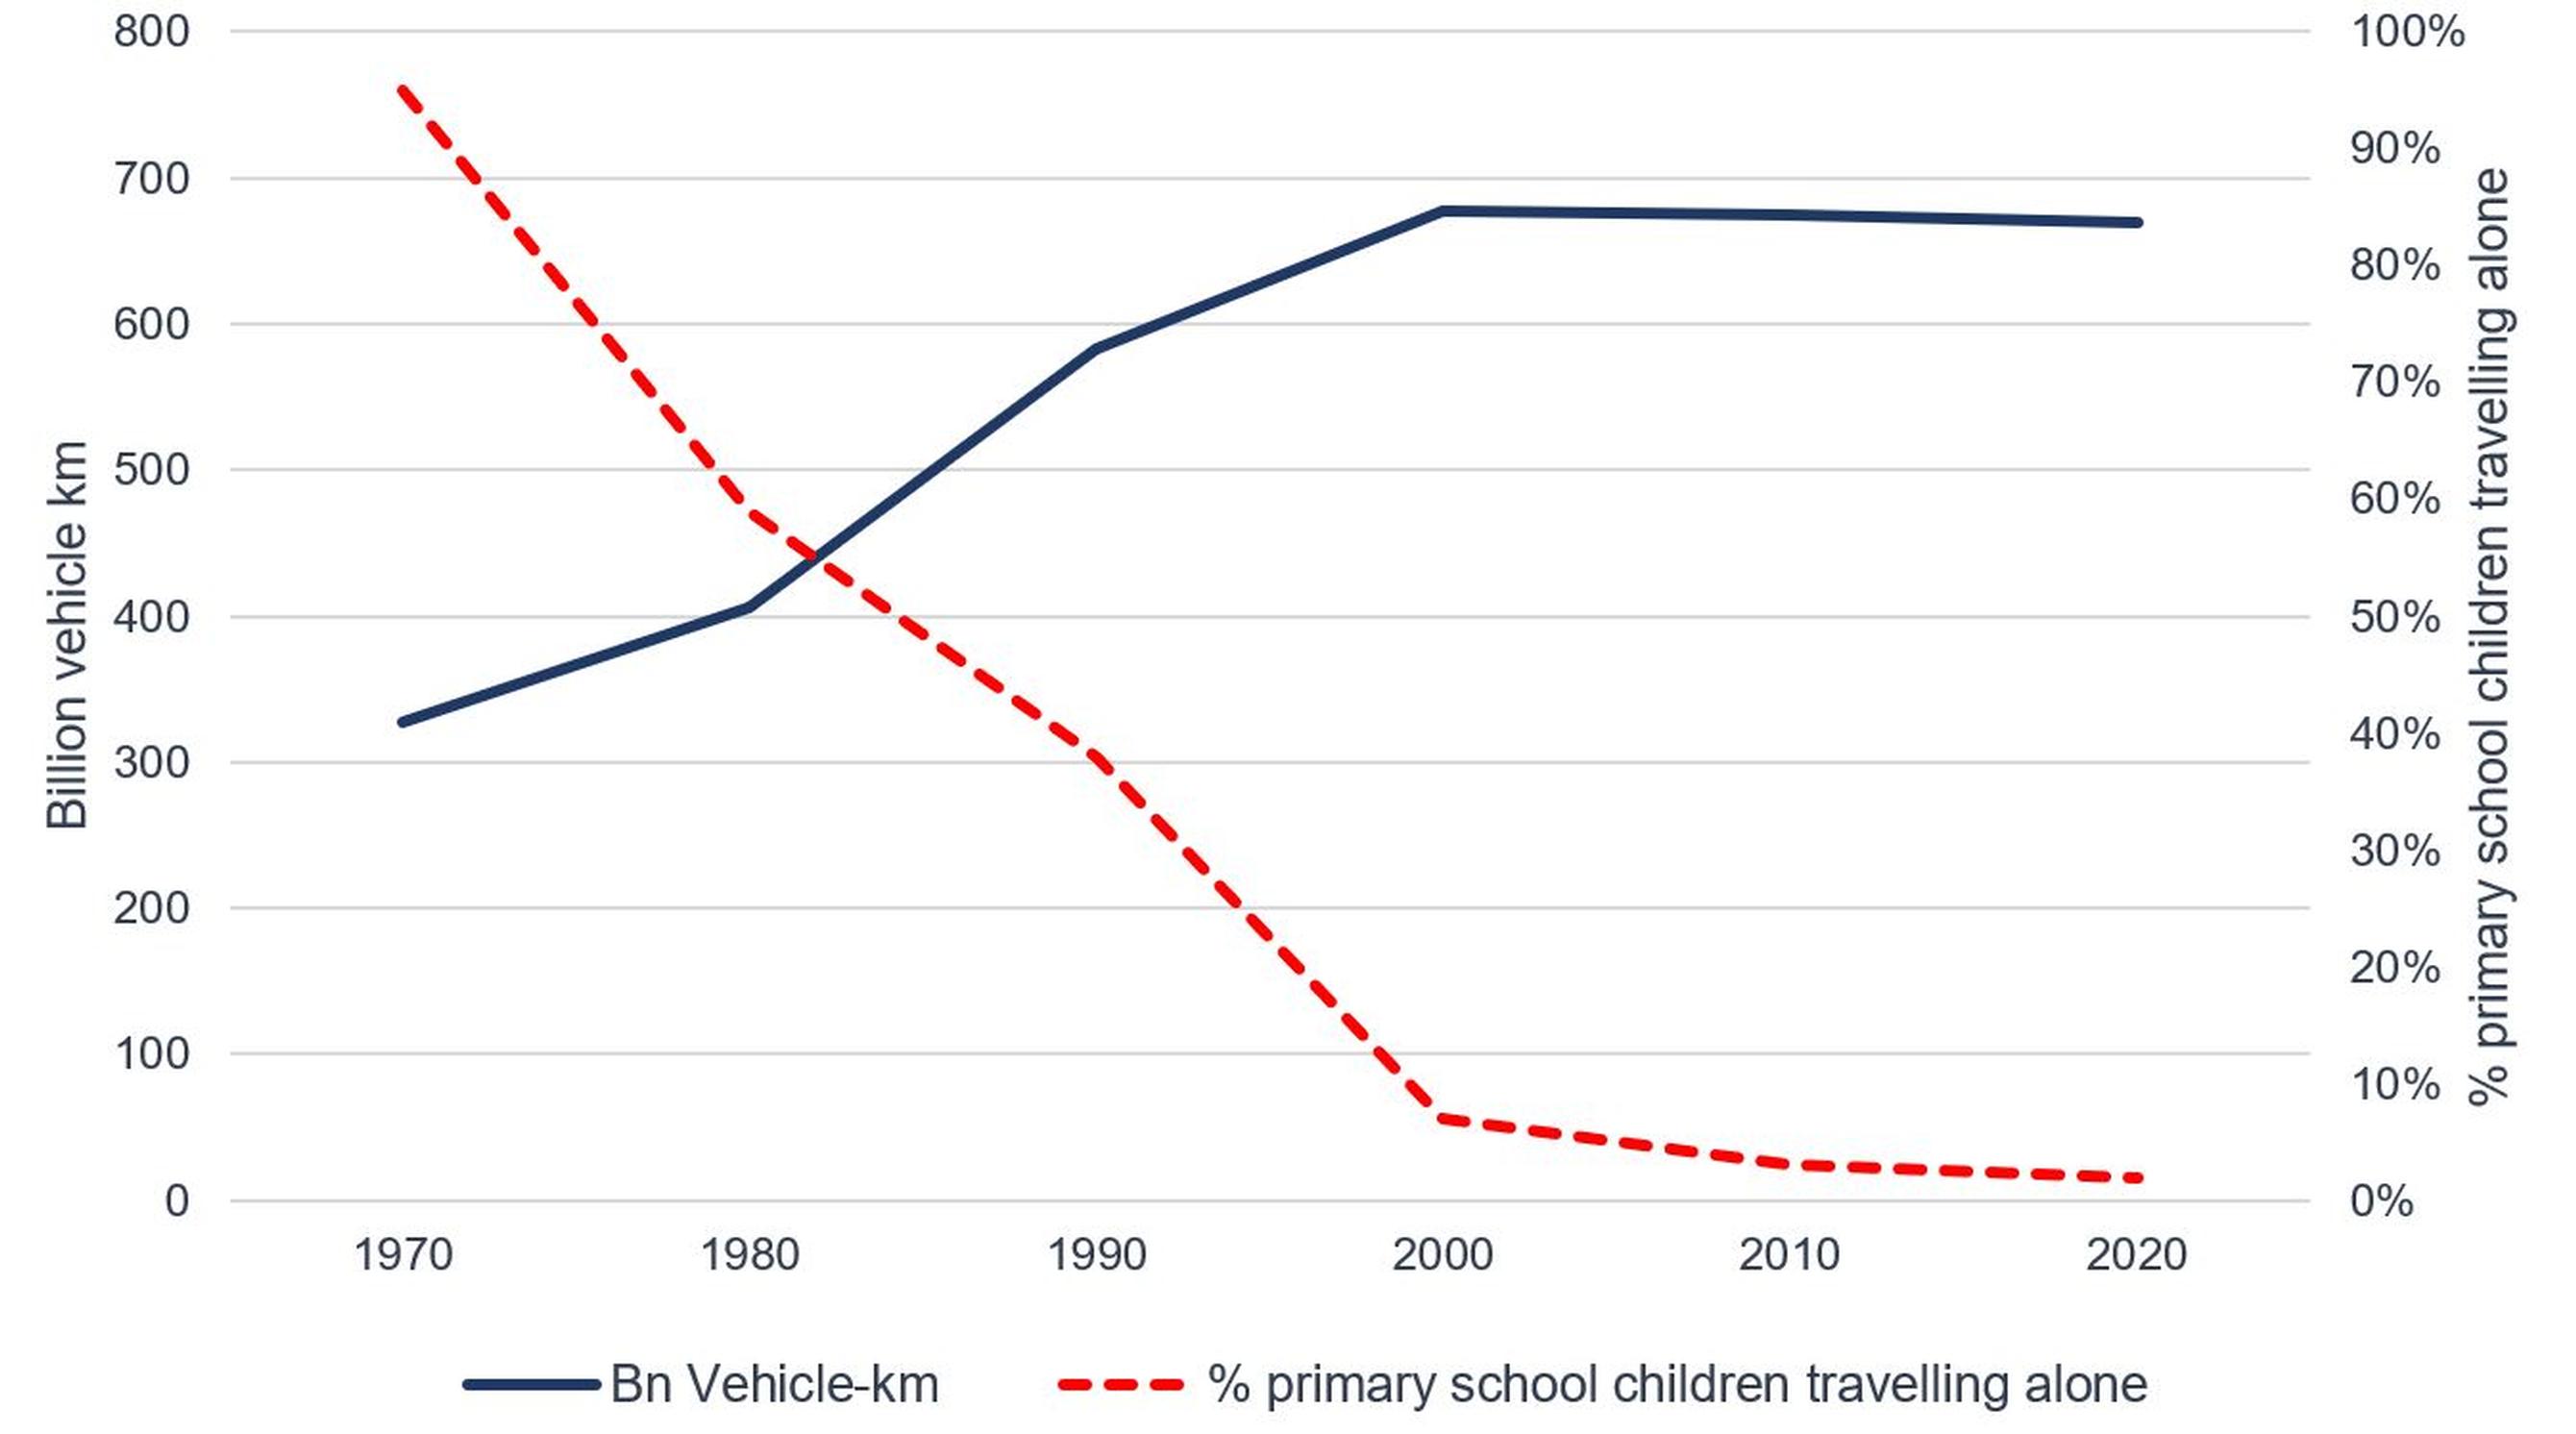 Figure 3: Passenger transport by car, van, and taxi and percentage of children travelling to primary school alone. Sources: Transport Statistics of Great Britain, NTS, 2014, 2013 [NTS0616]. Hillman, M., Adams, J., and Whitelegg, J 1990. One false move. London: Policy Studies Institute